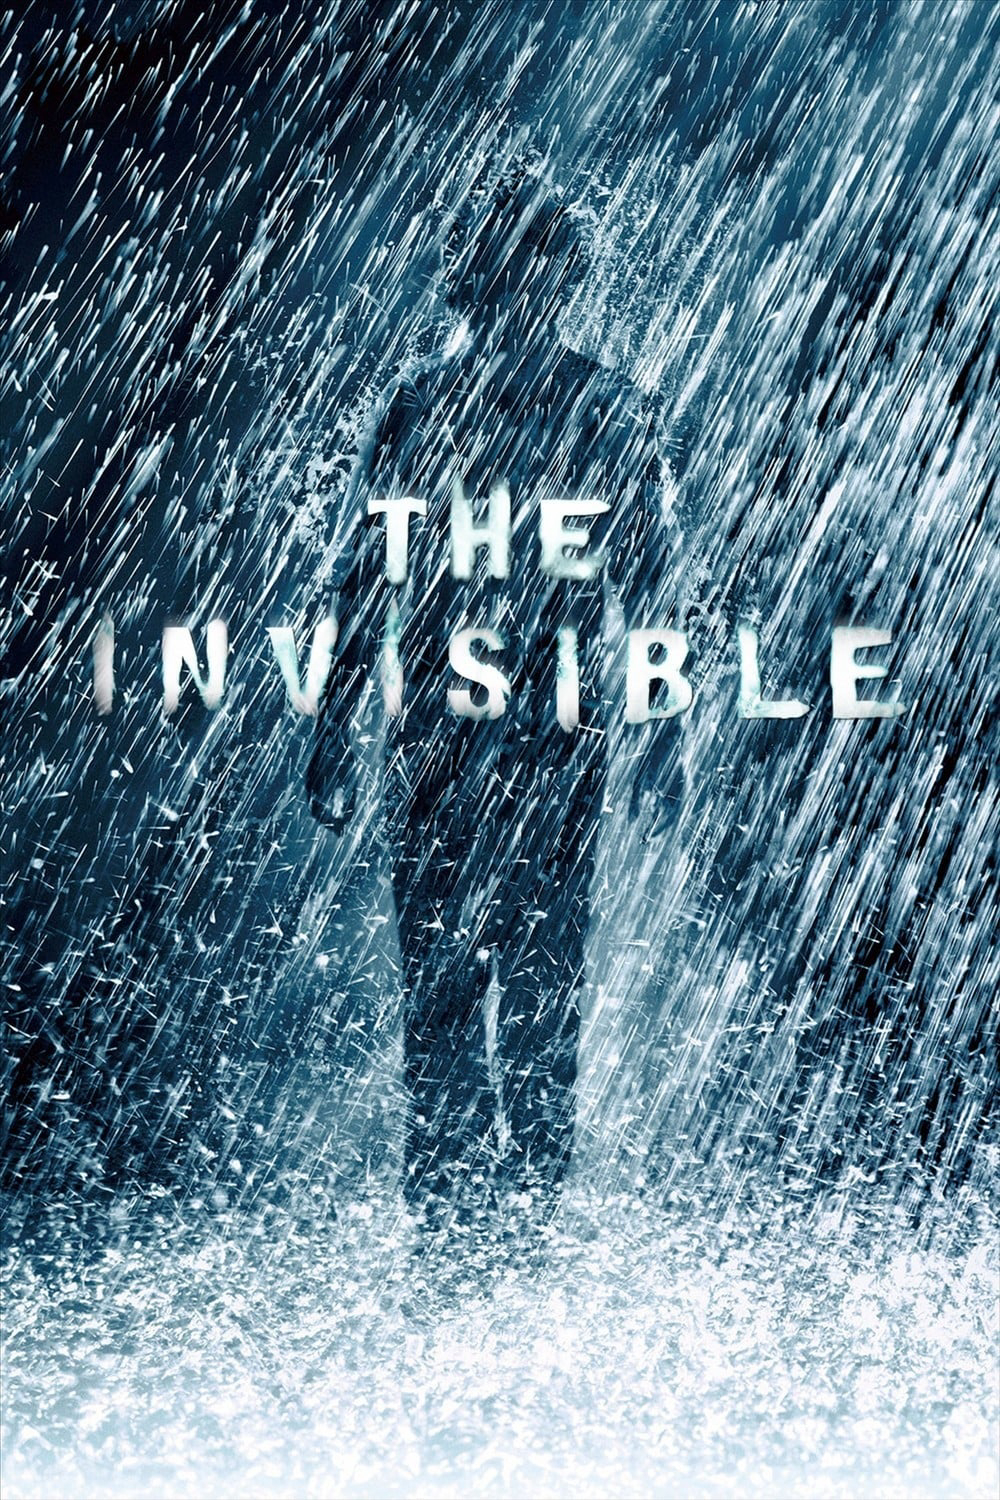 Poster Phim The Invisible (The Invisible)